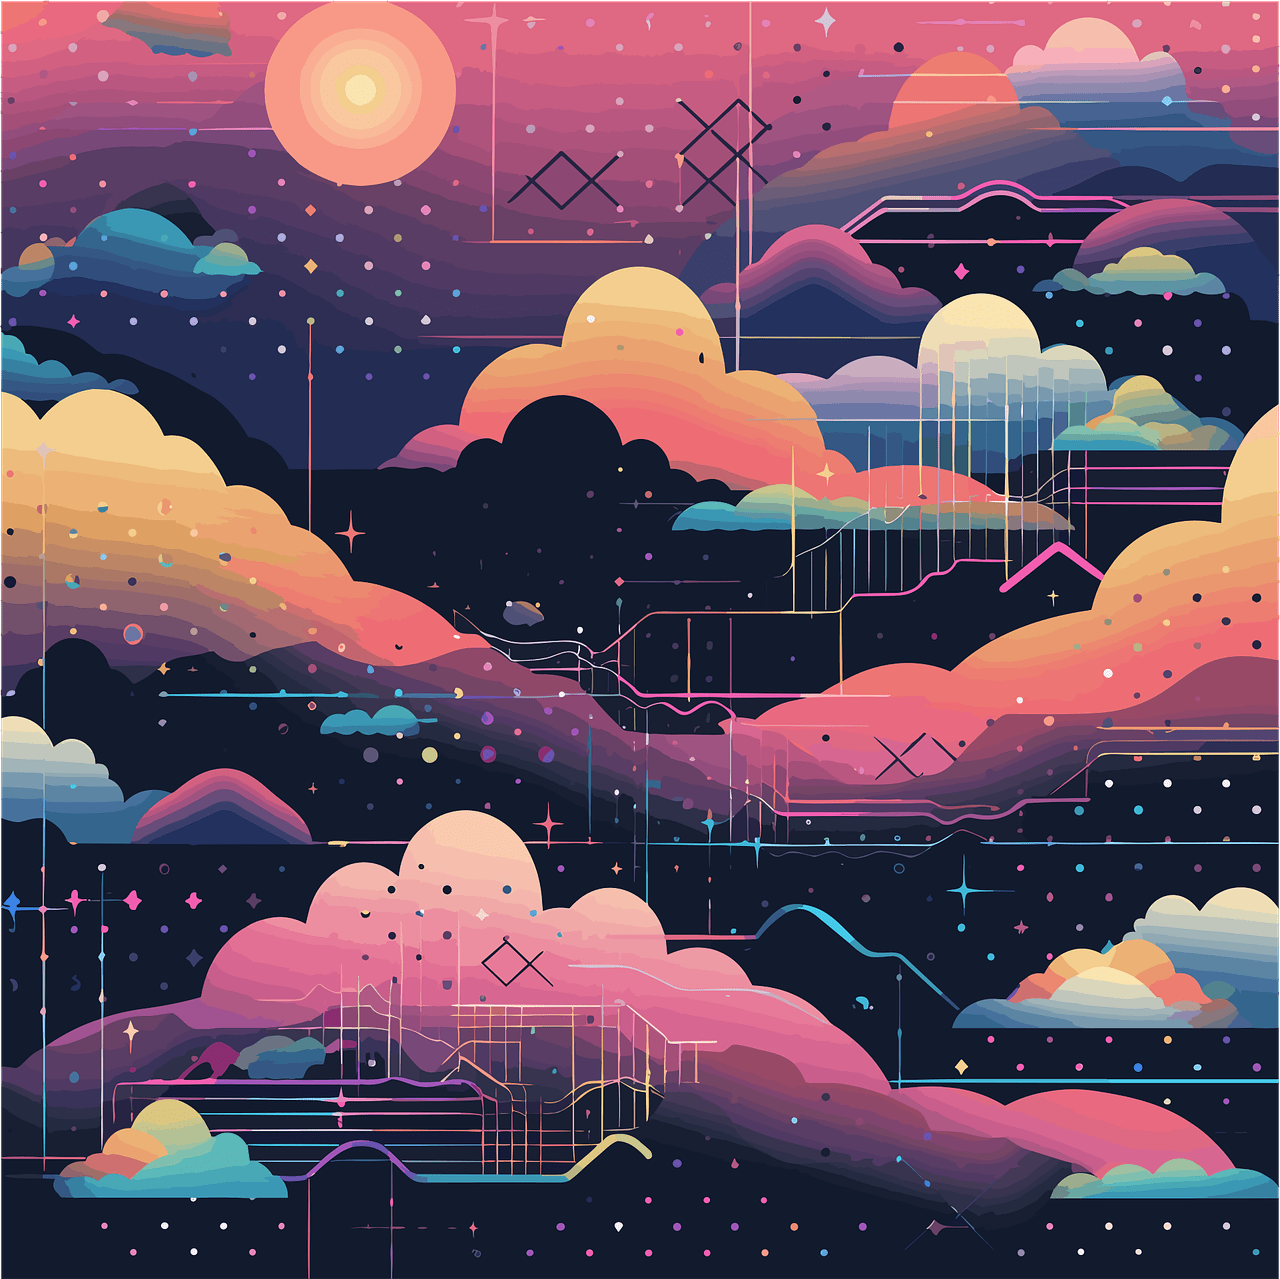 A digital illustration of a night sky with clouds and stars - Vector